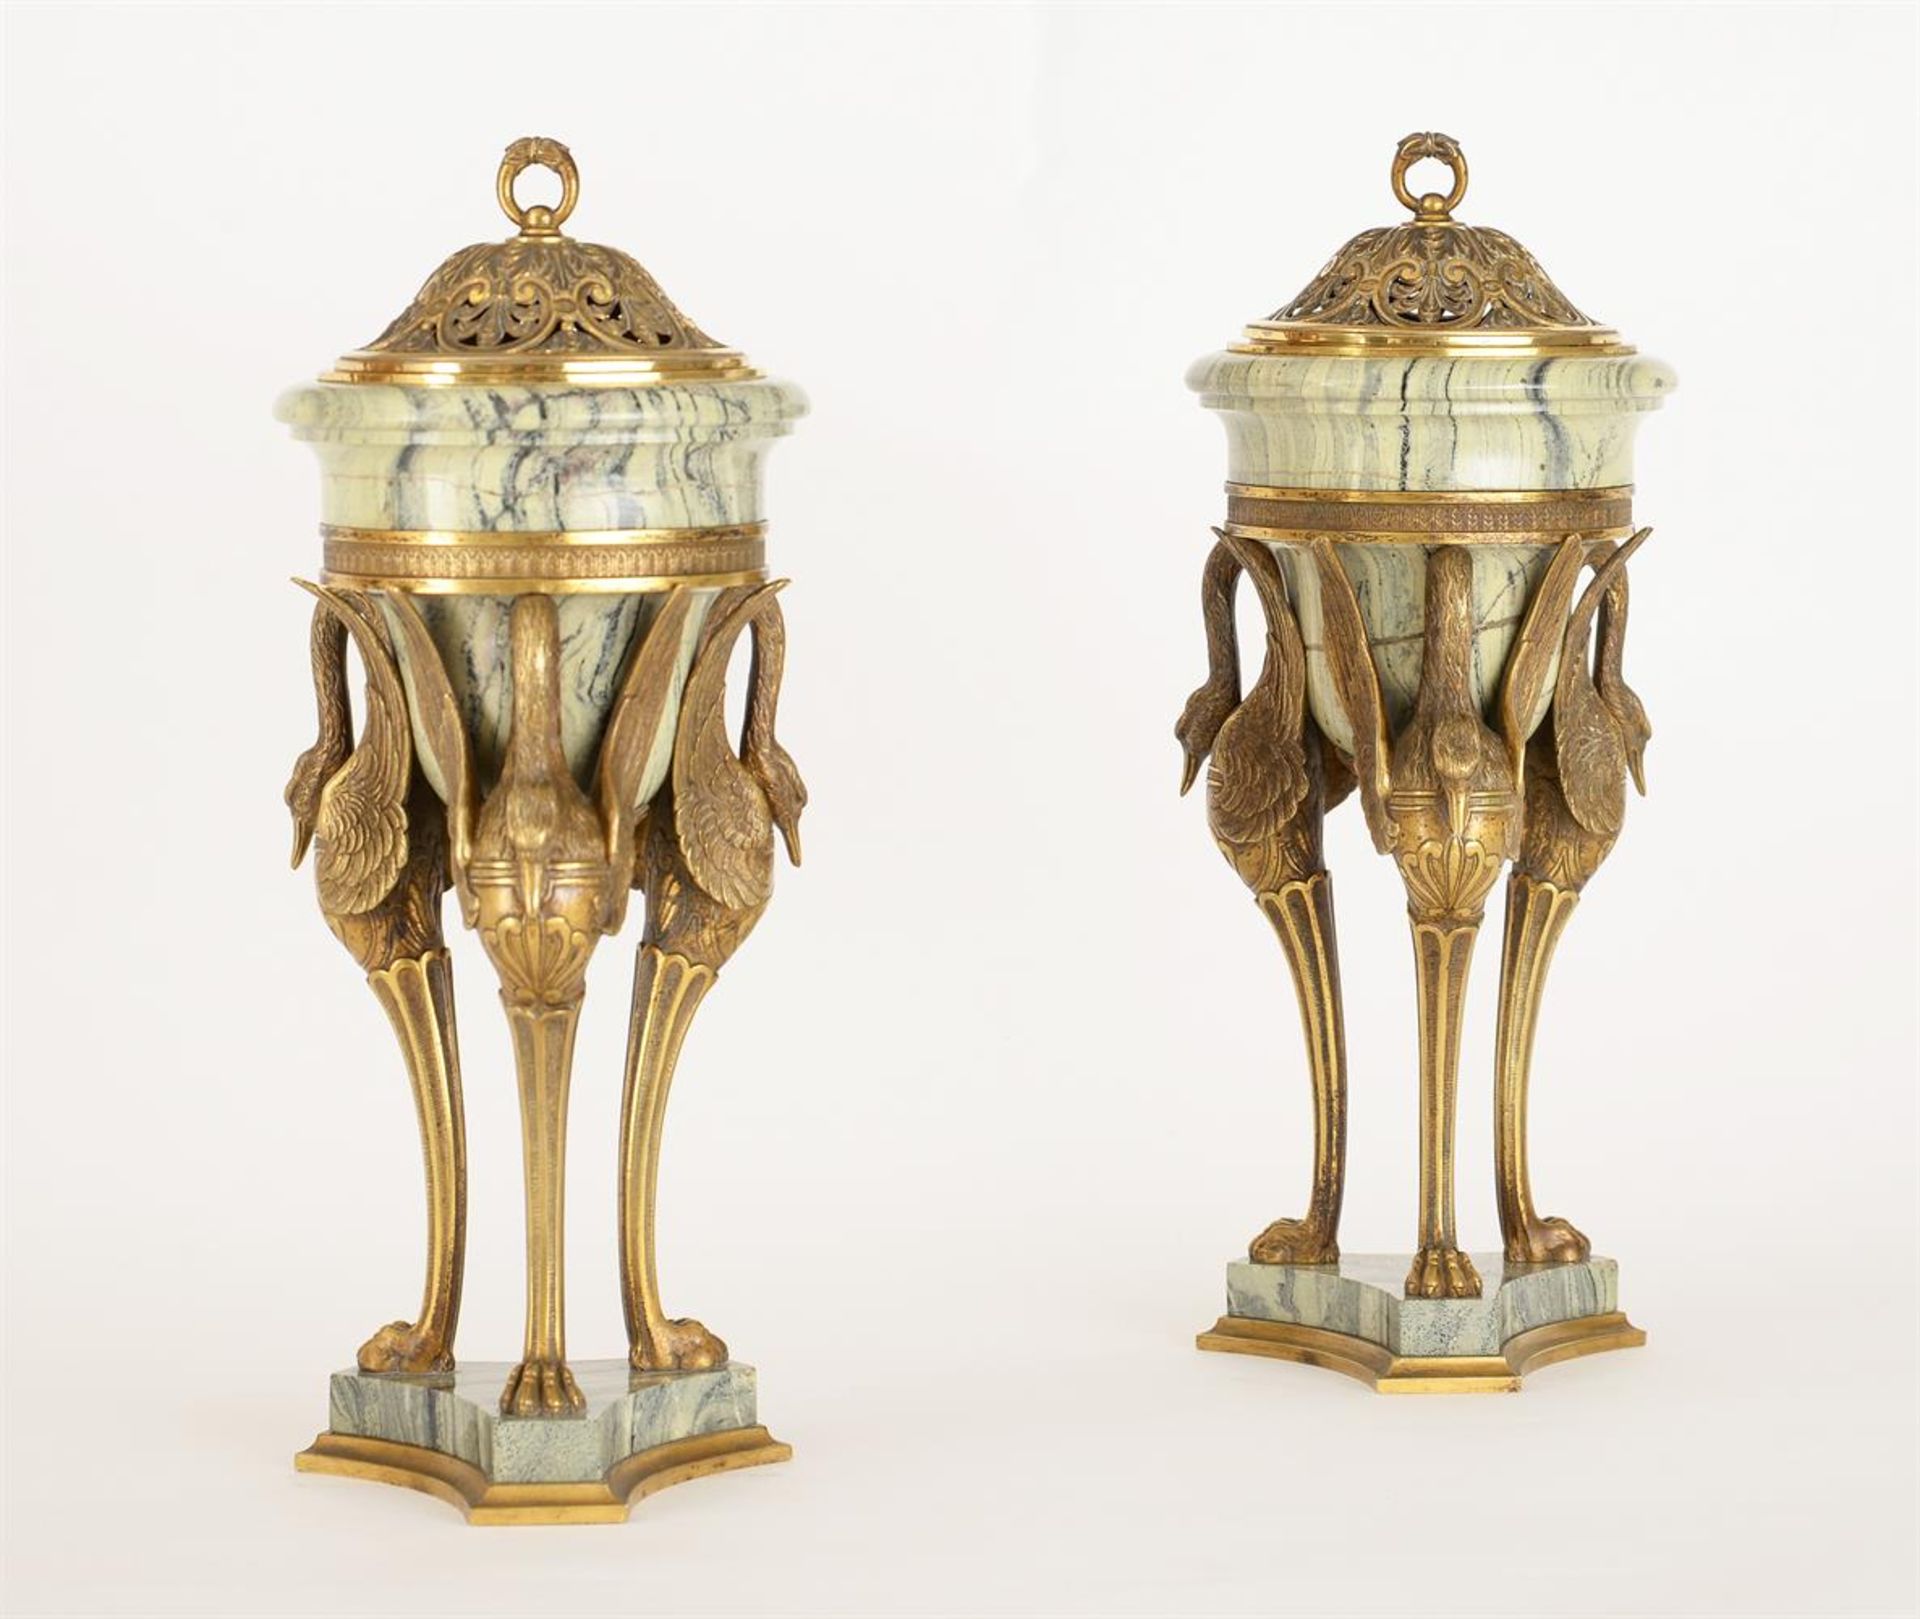 A PAIR OF FRENCH ORMOLU AND CIPOLLINO MARBLE URNS, LATE 19TH CENTURY - Image 2 of 4